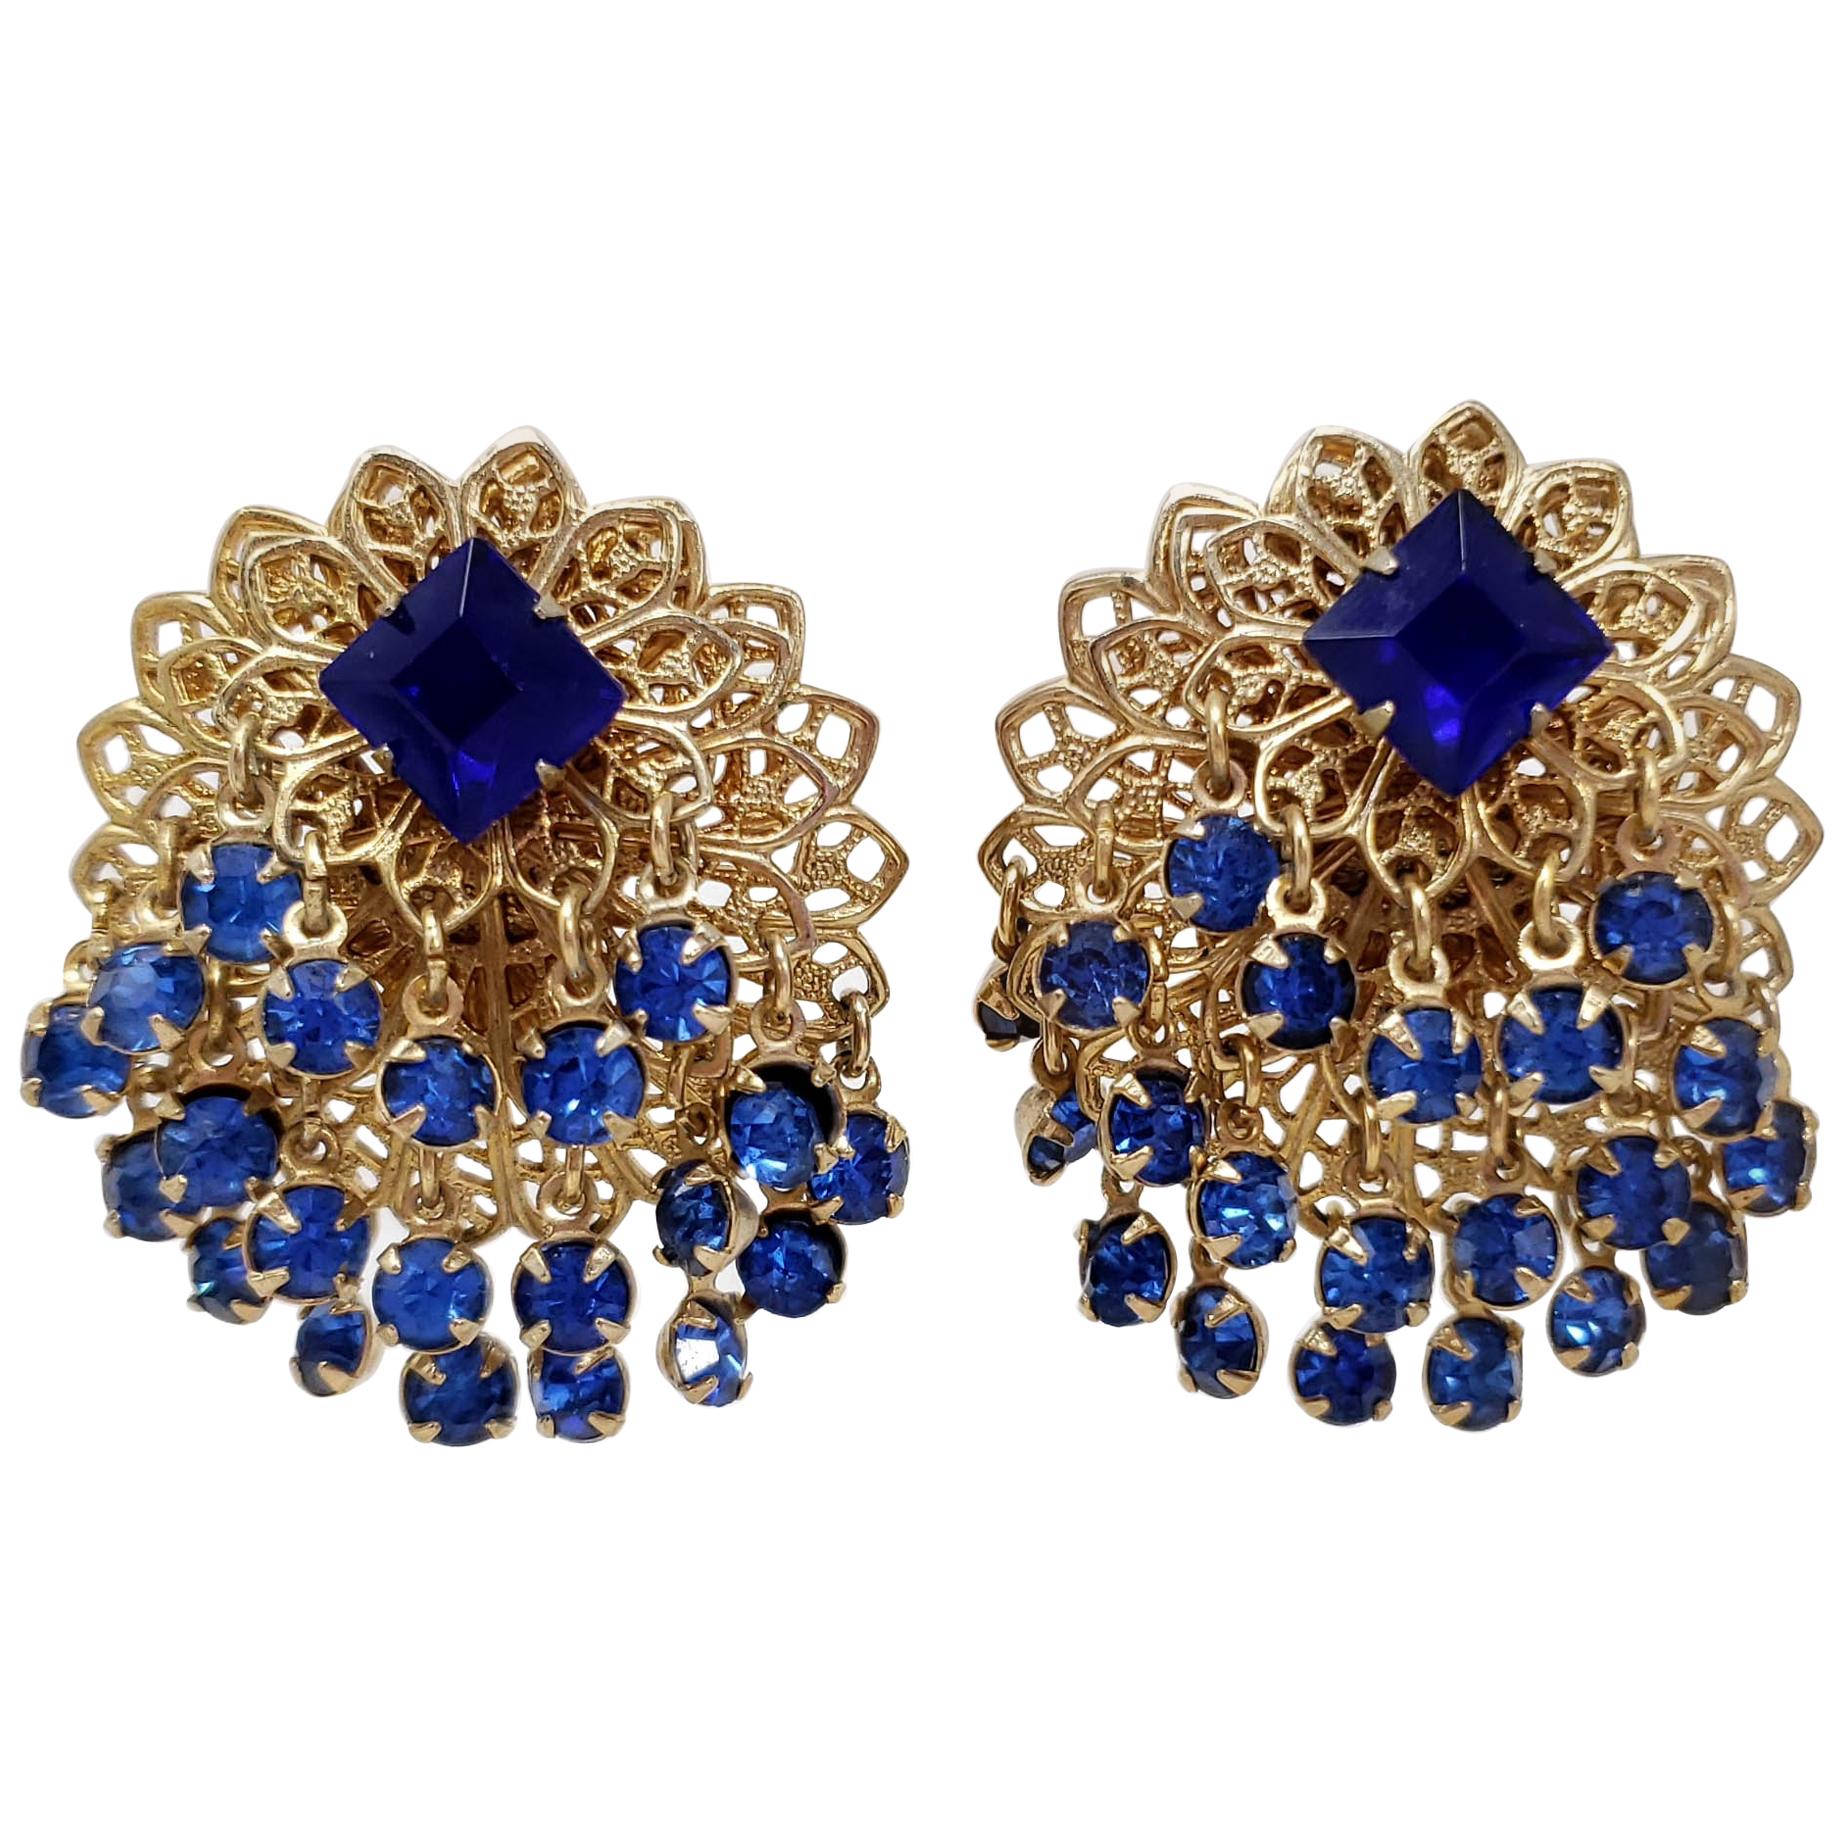 Layered Filigree Sapphire Crystal Cluster Clip on Earrings in Gold, Mid 1900s